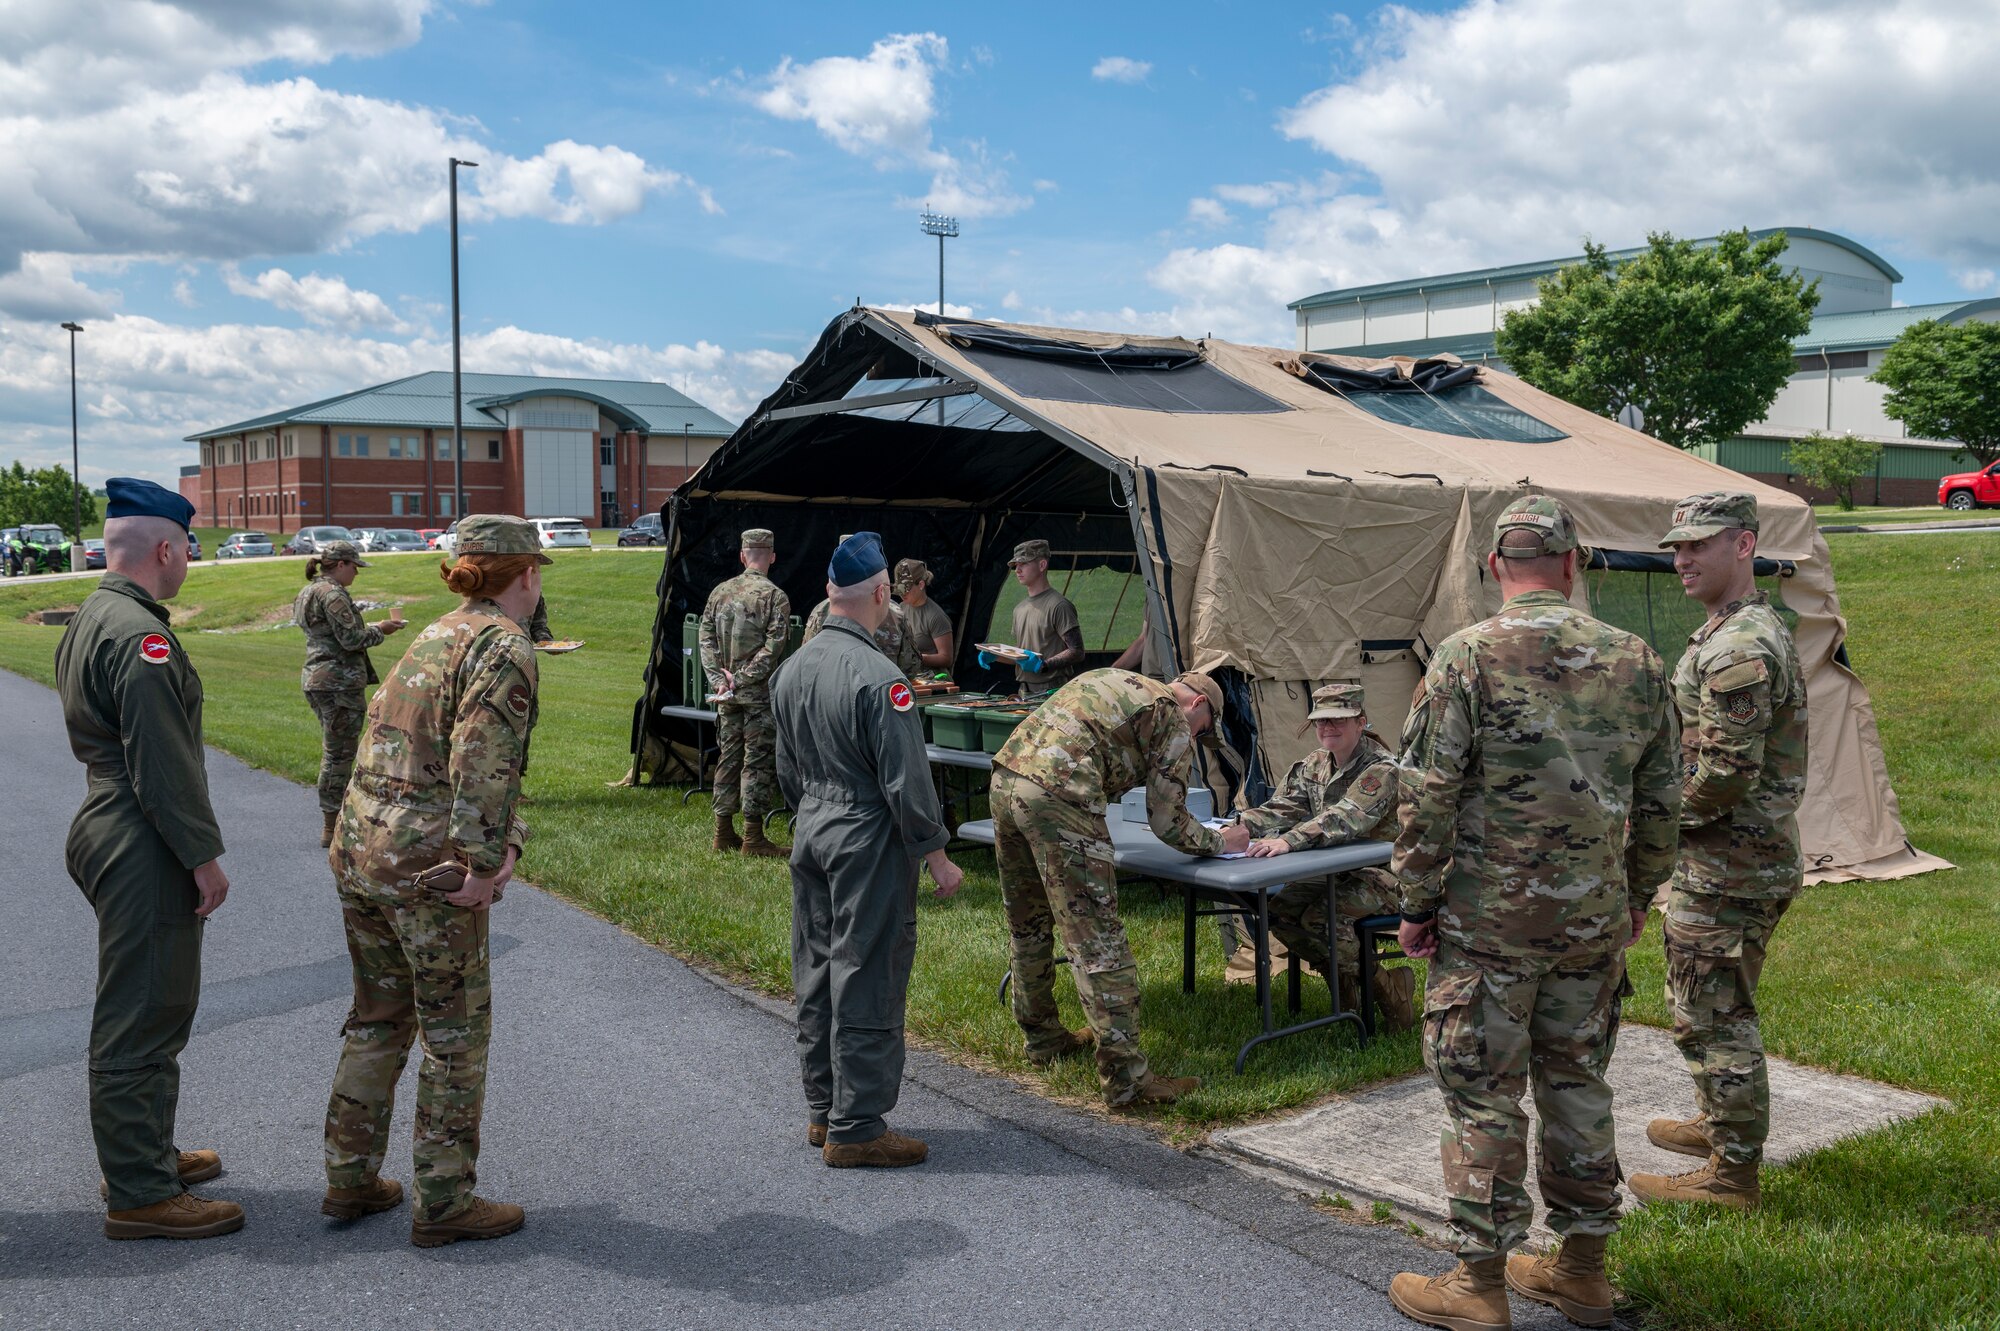 Airmen with the 167th Airlift Wing stand in line at a single pallet expeditionary kitchen (SPEK) as part of field feeding operations during June’s unit training assembly at the 167th Airlift Wing, Martinsburg, West Virginia, June 9, 2022. The purpose of the SPEK exercise is to provide valuable training to the 167th FSS Airmen while utilizing the mobile kitchen that can be operated in a deployed environment.